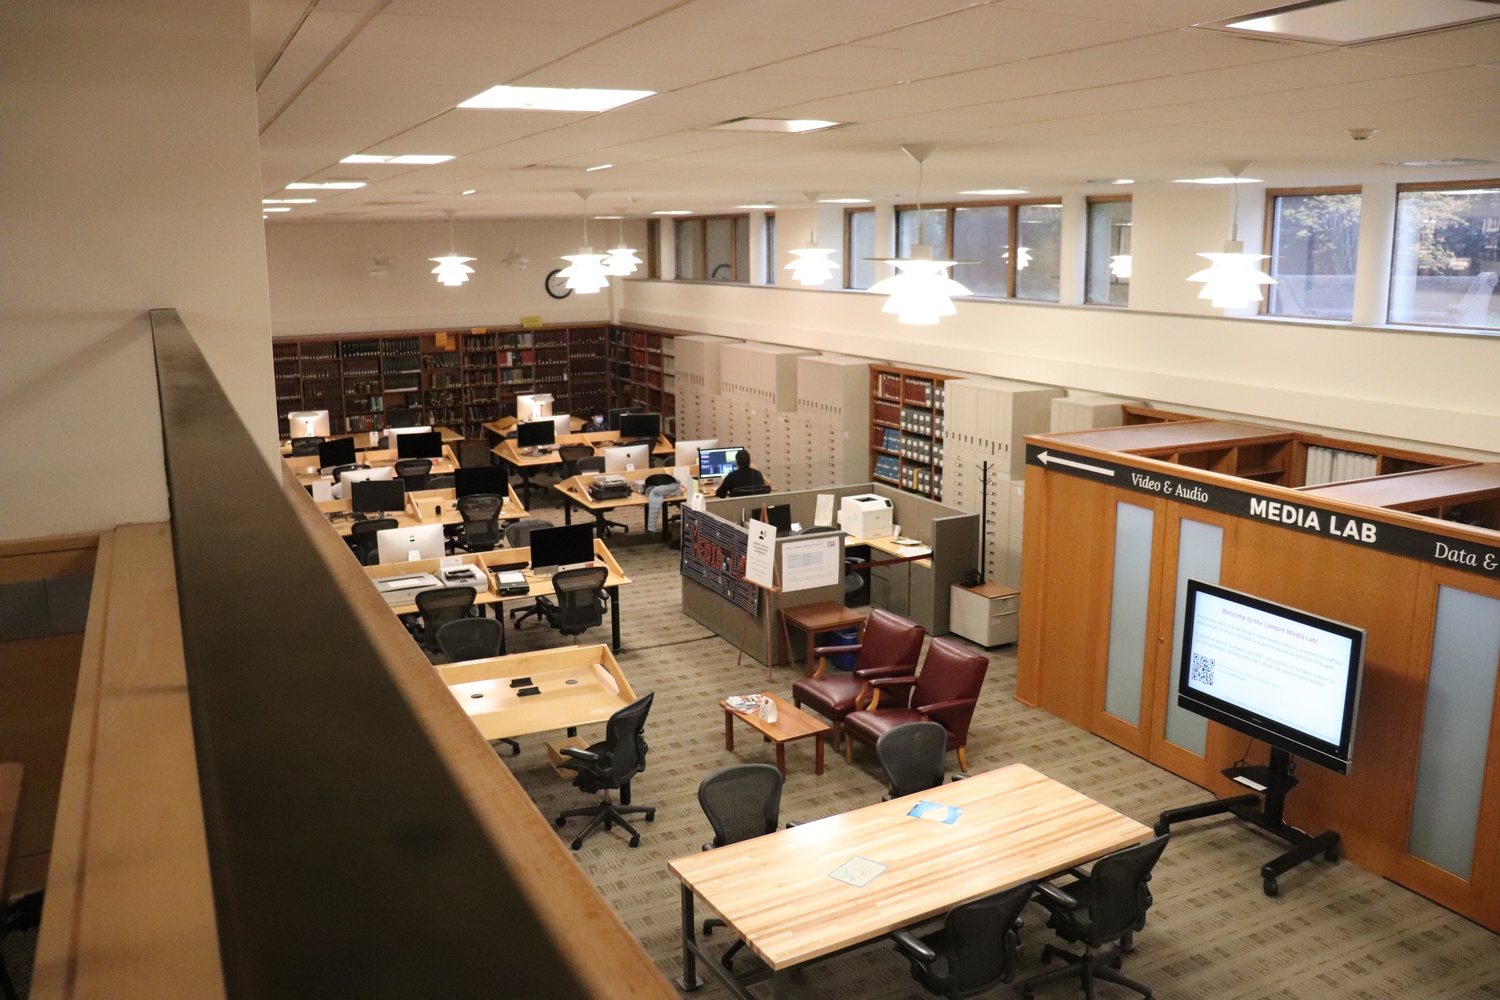 Lamont Library is a popular study space for Harvard undergraduates.